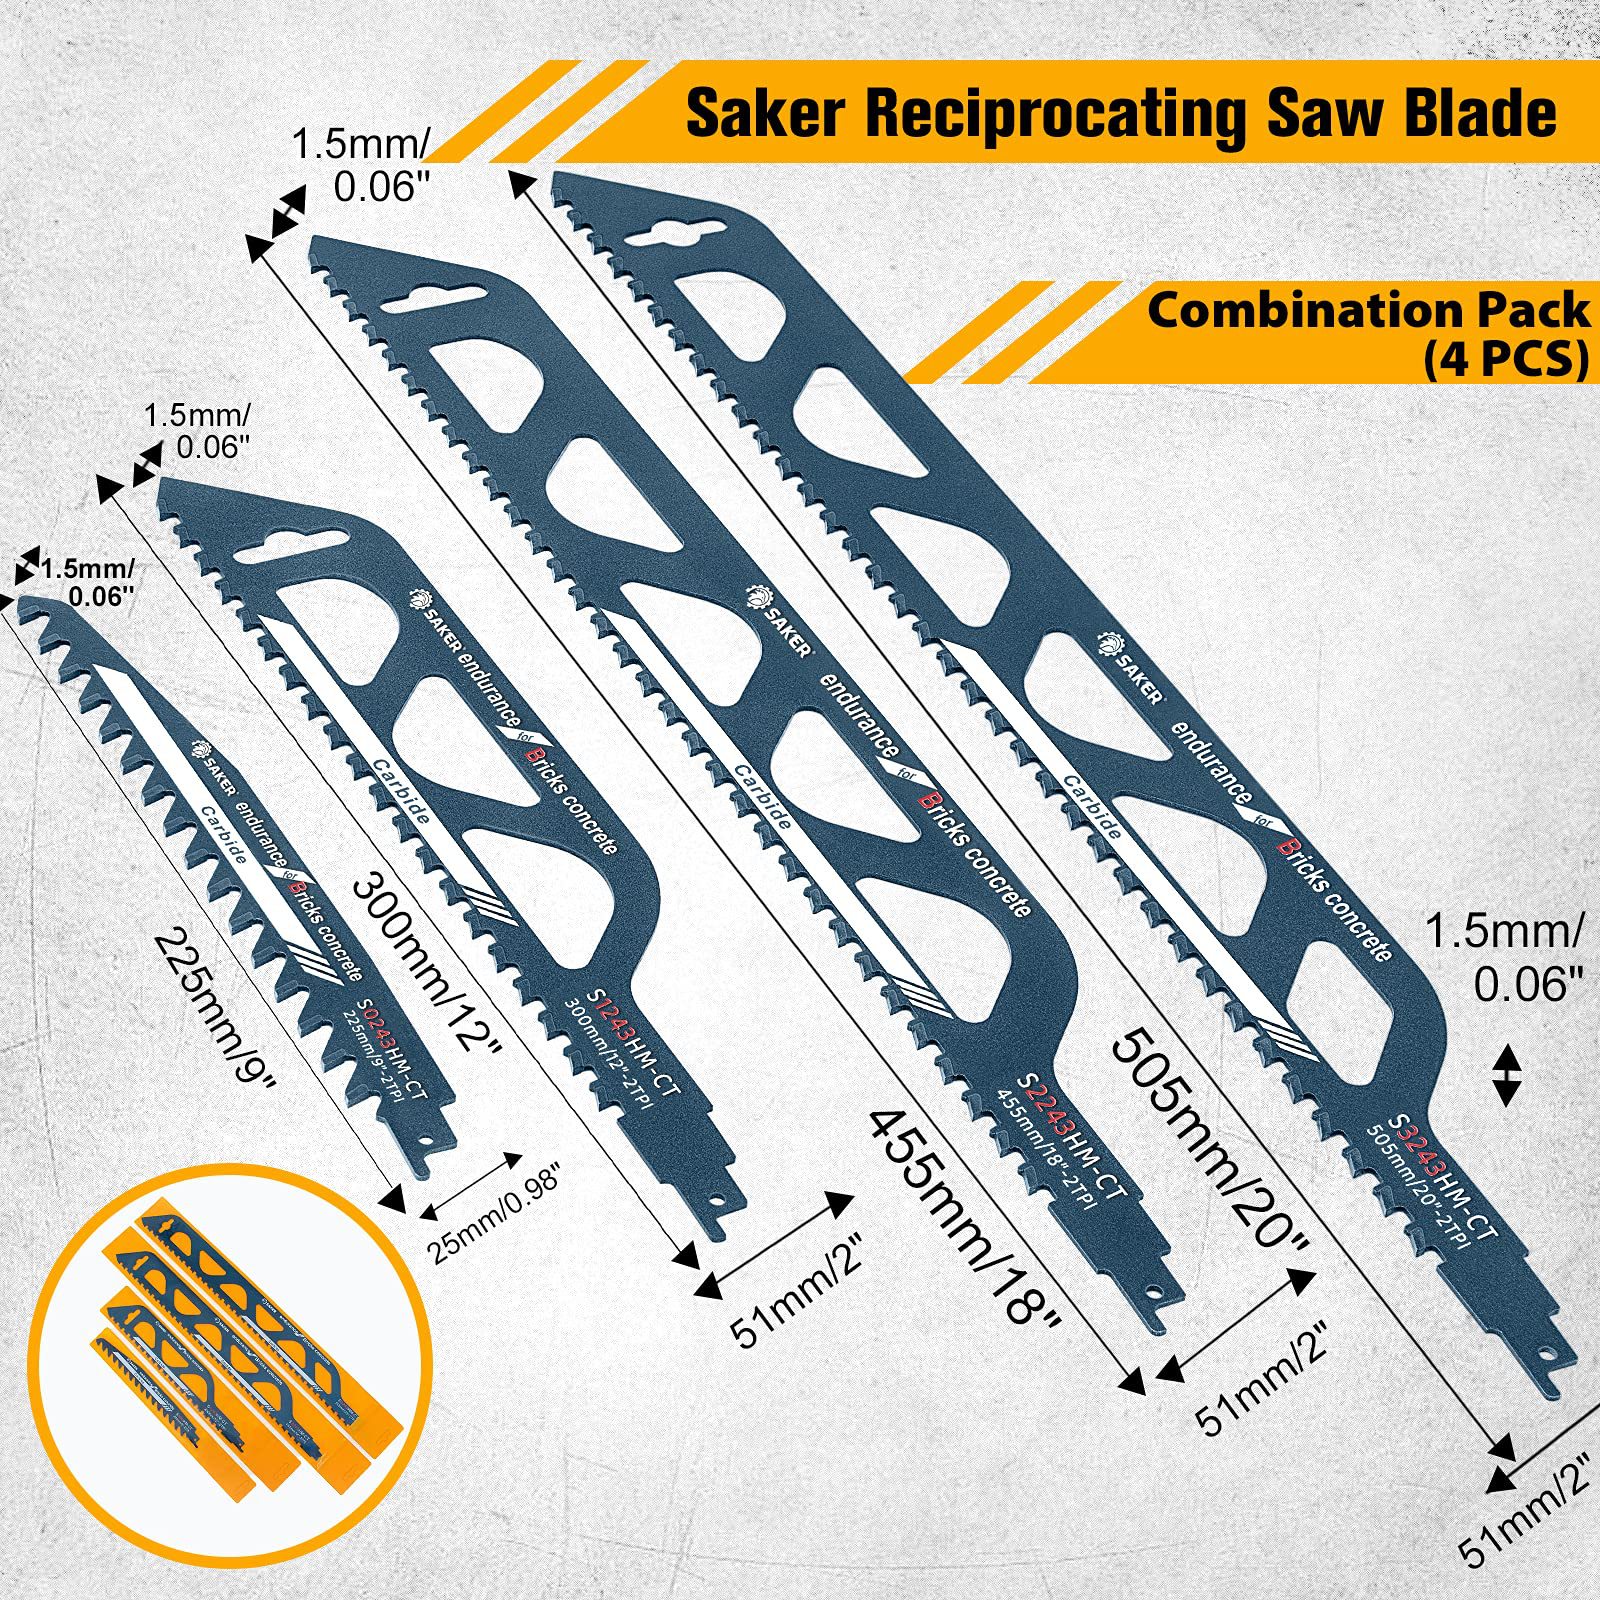 Reciprocating Saw Blade for Cutting EVERYTHING